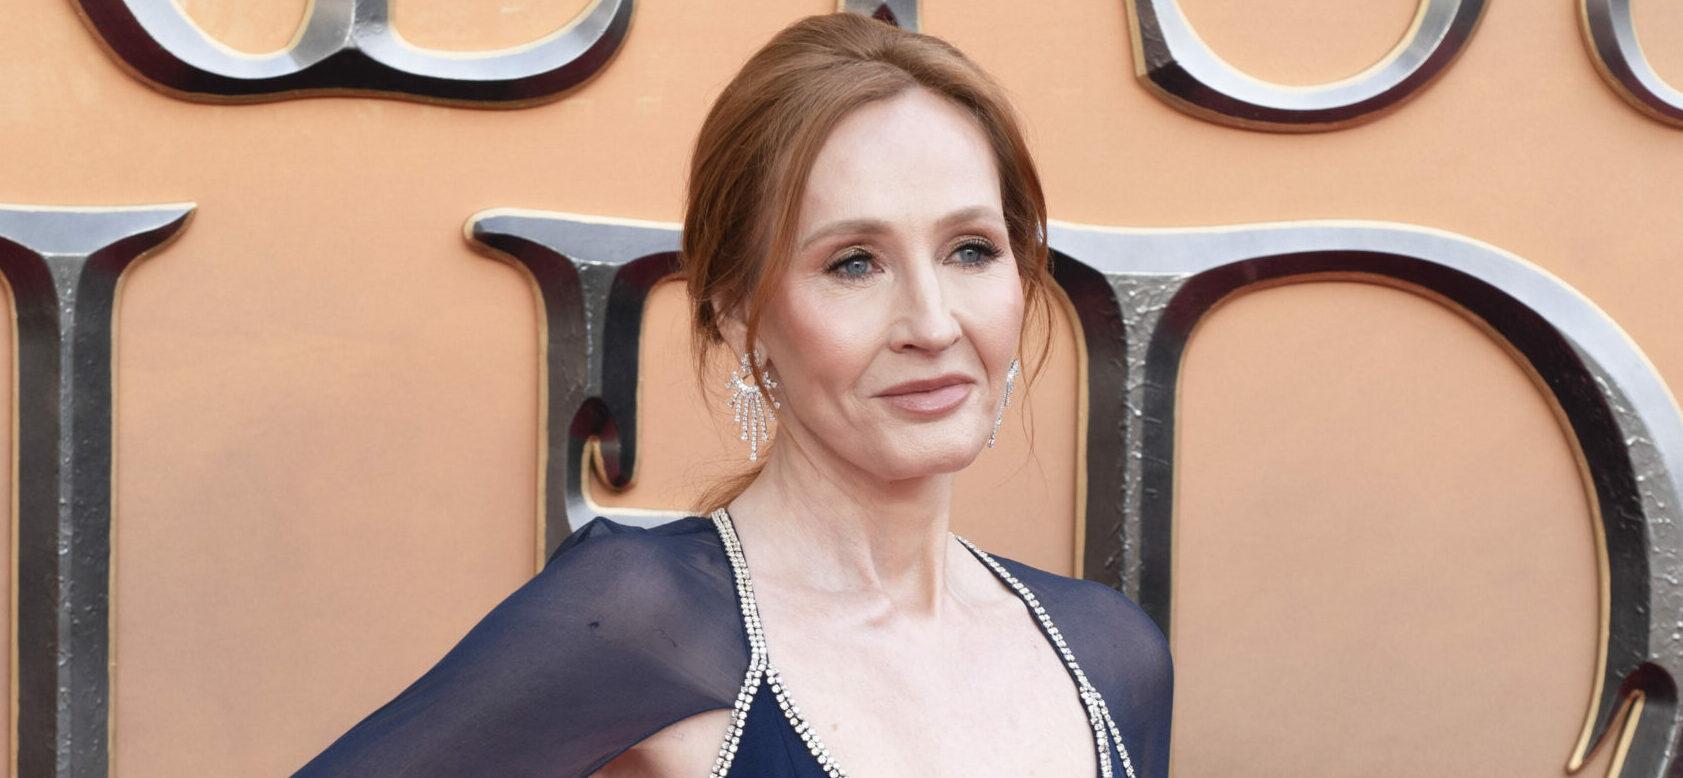 Trans Activist’s Video Gets Pulled By Twitter For Death Threat Aimed At J.K. Rowling